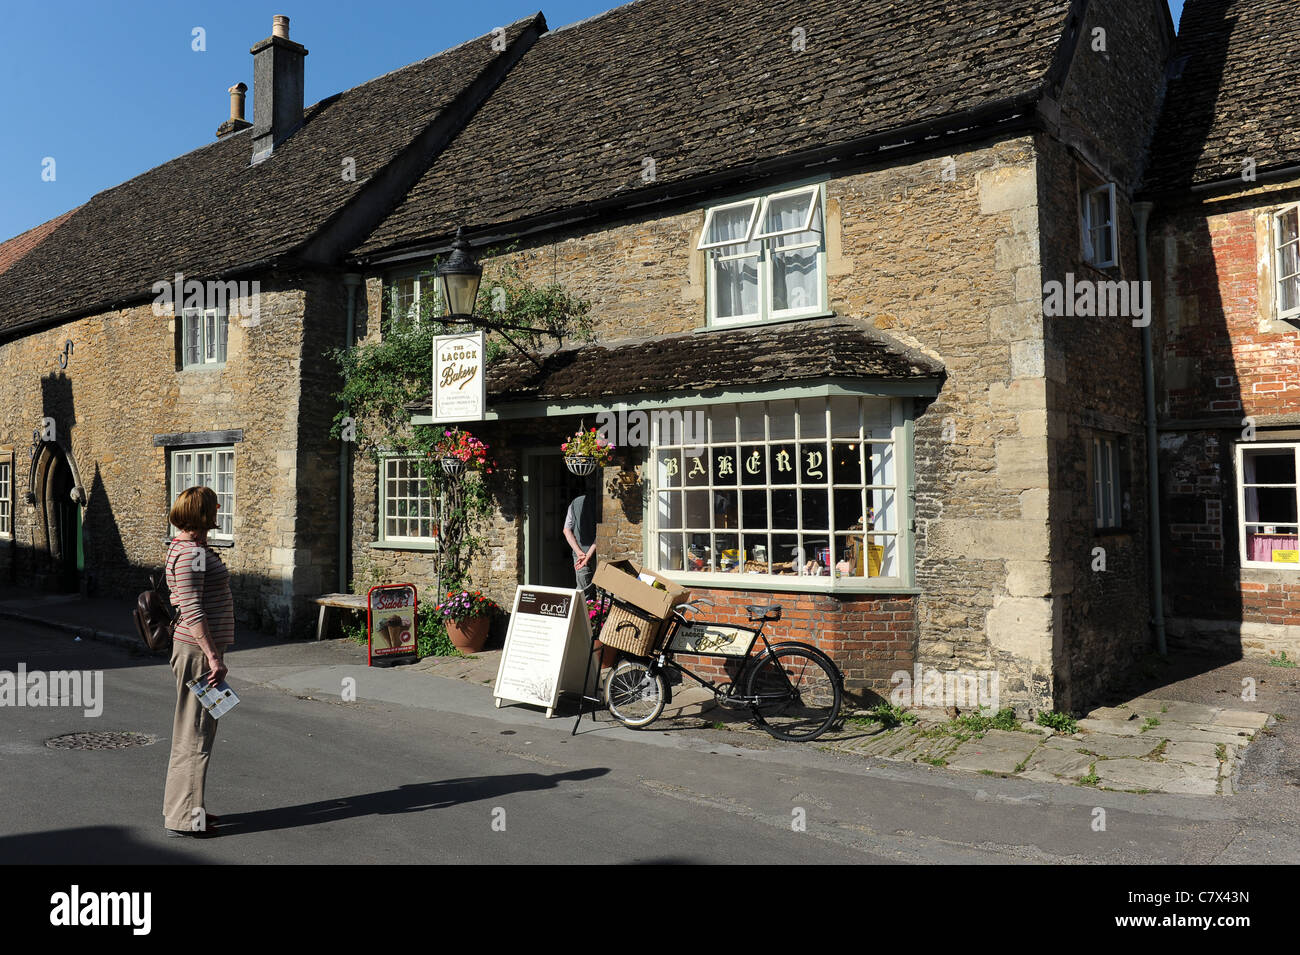 The Lacock Bakery shop in the Village of Lacock Wiltshire Uk Stock Photo